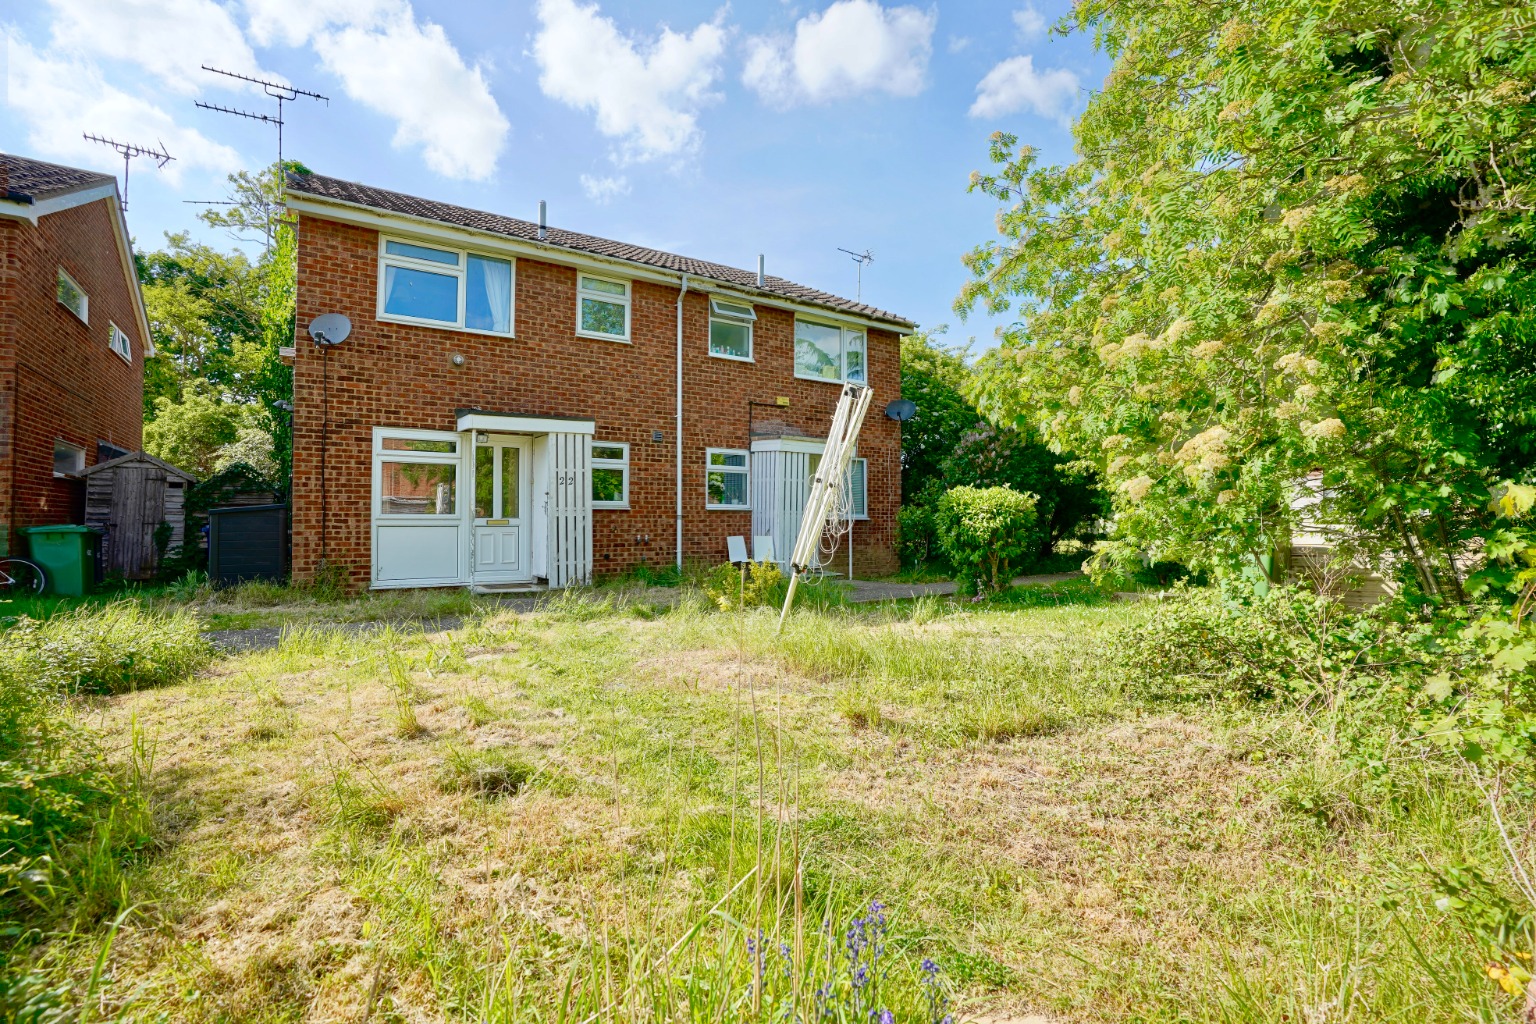 1 bed semi-detached house for sale in Lavender Way, St Ives - Property Image 1